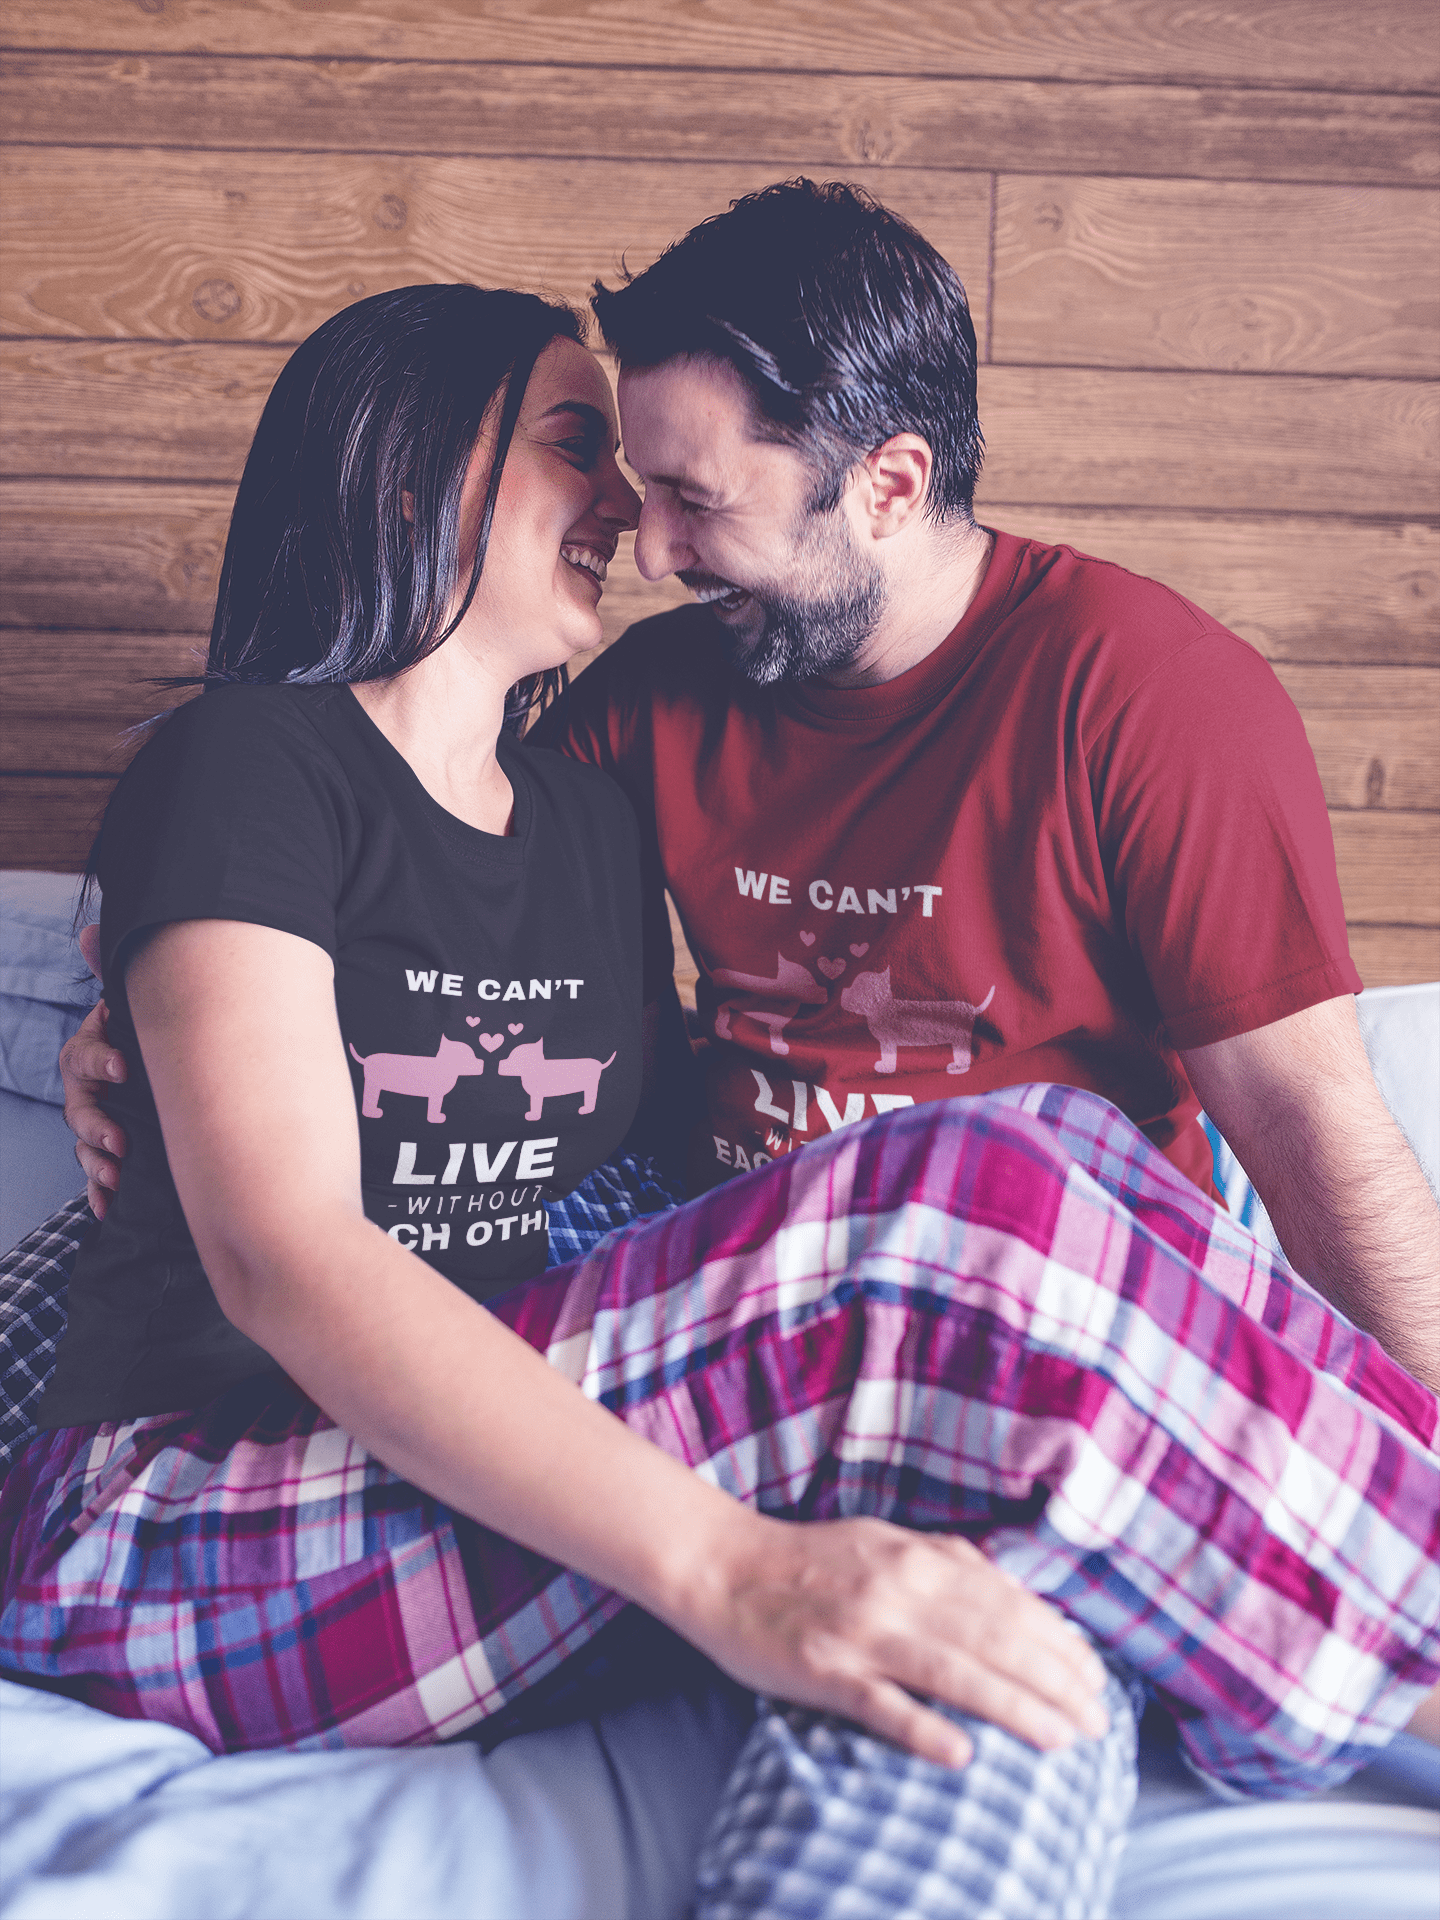 Shop We Can't Live Without Each Other Statement Valentine's Day Short-Sleeve Unisex T-Shirt, Clothing T-shirts, USA Boutique